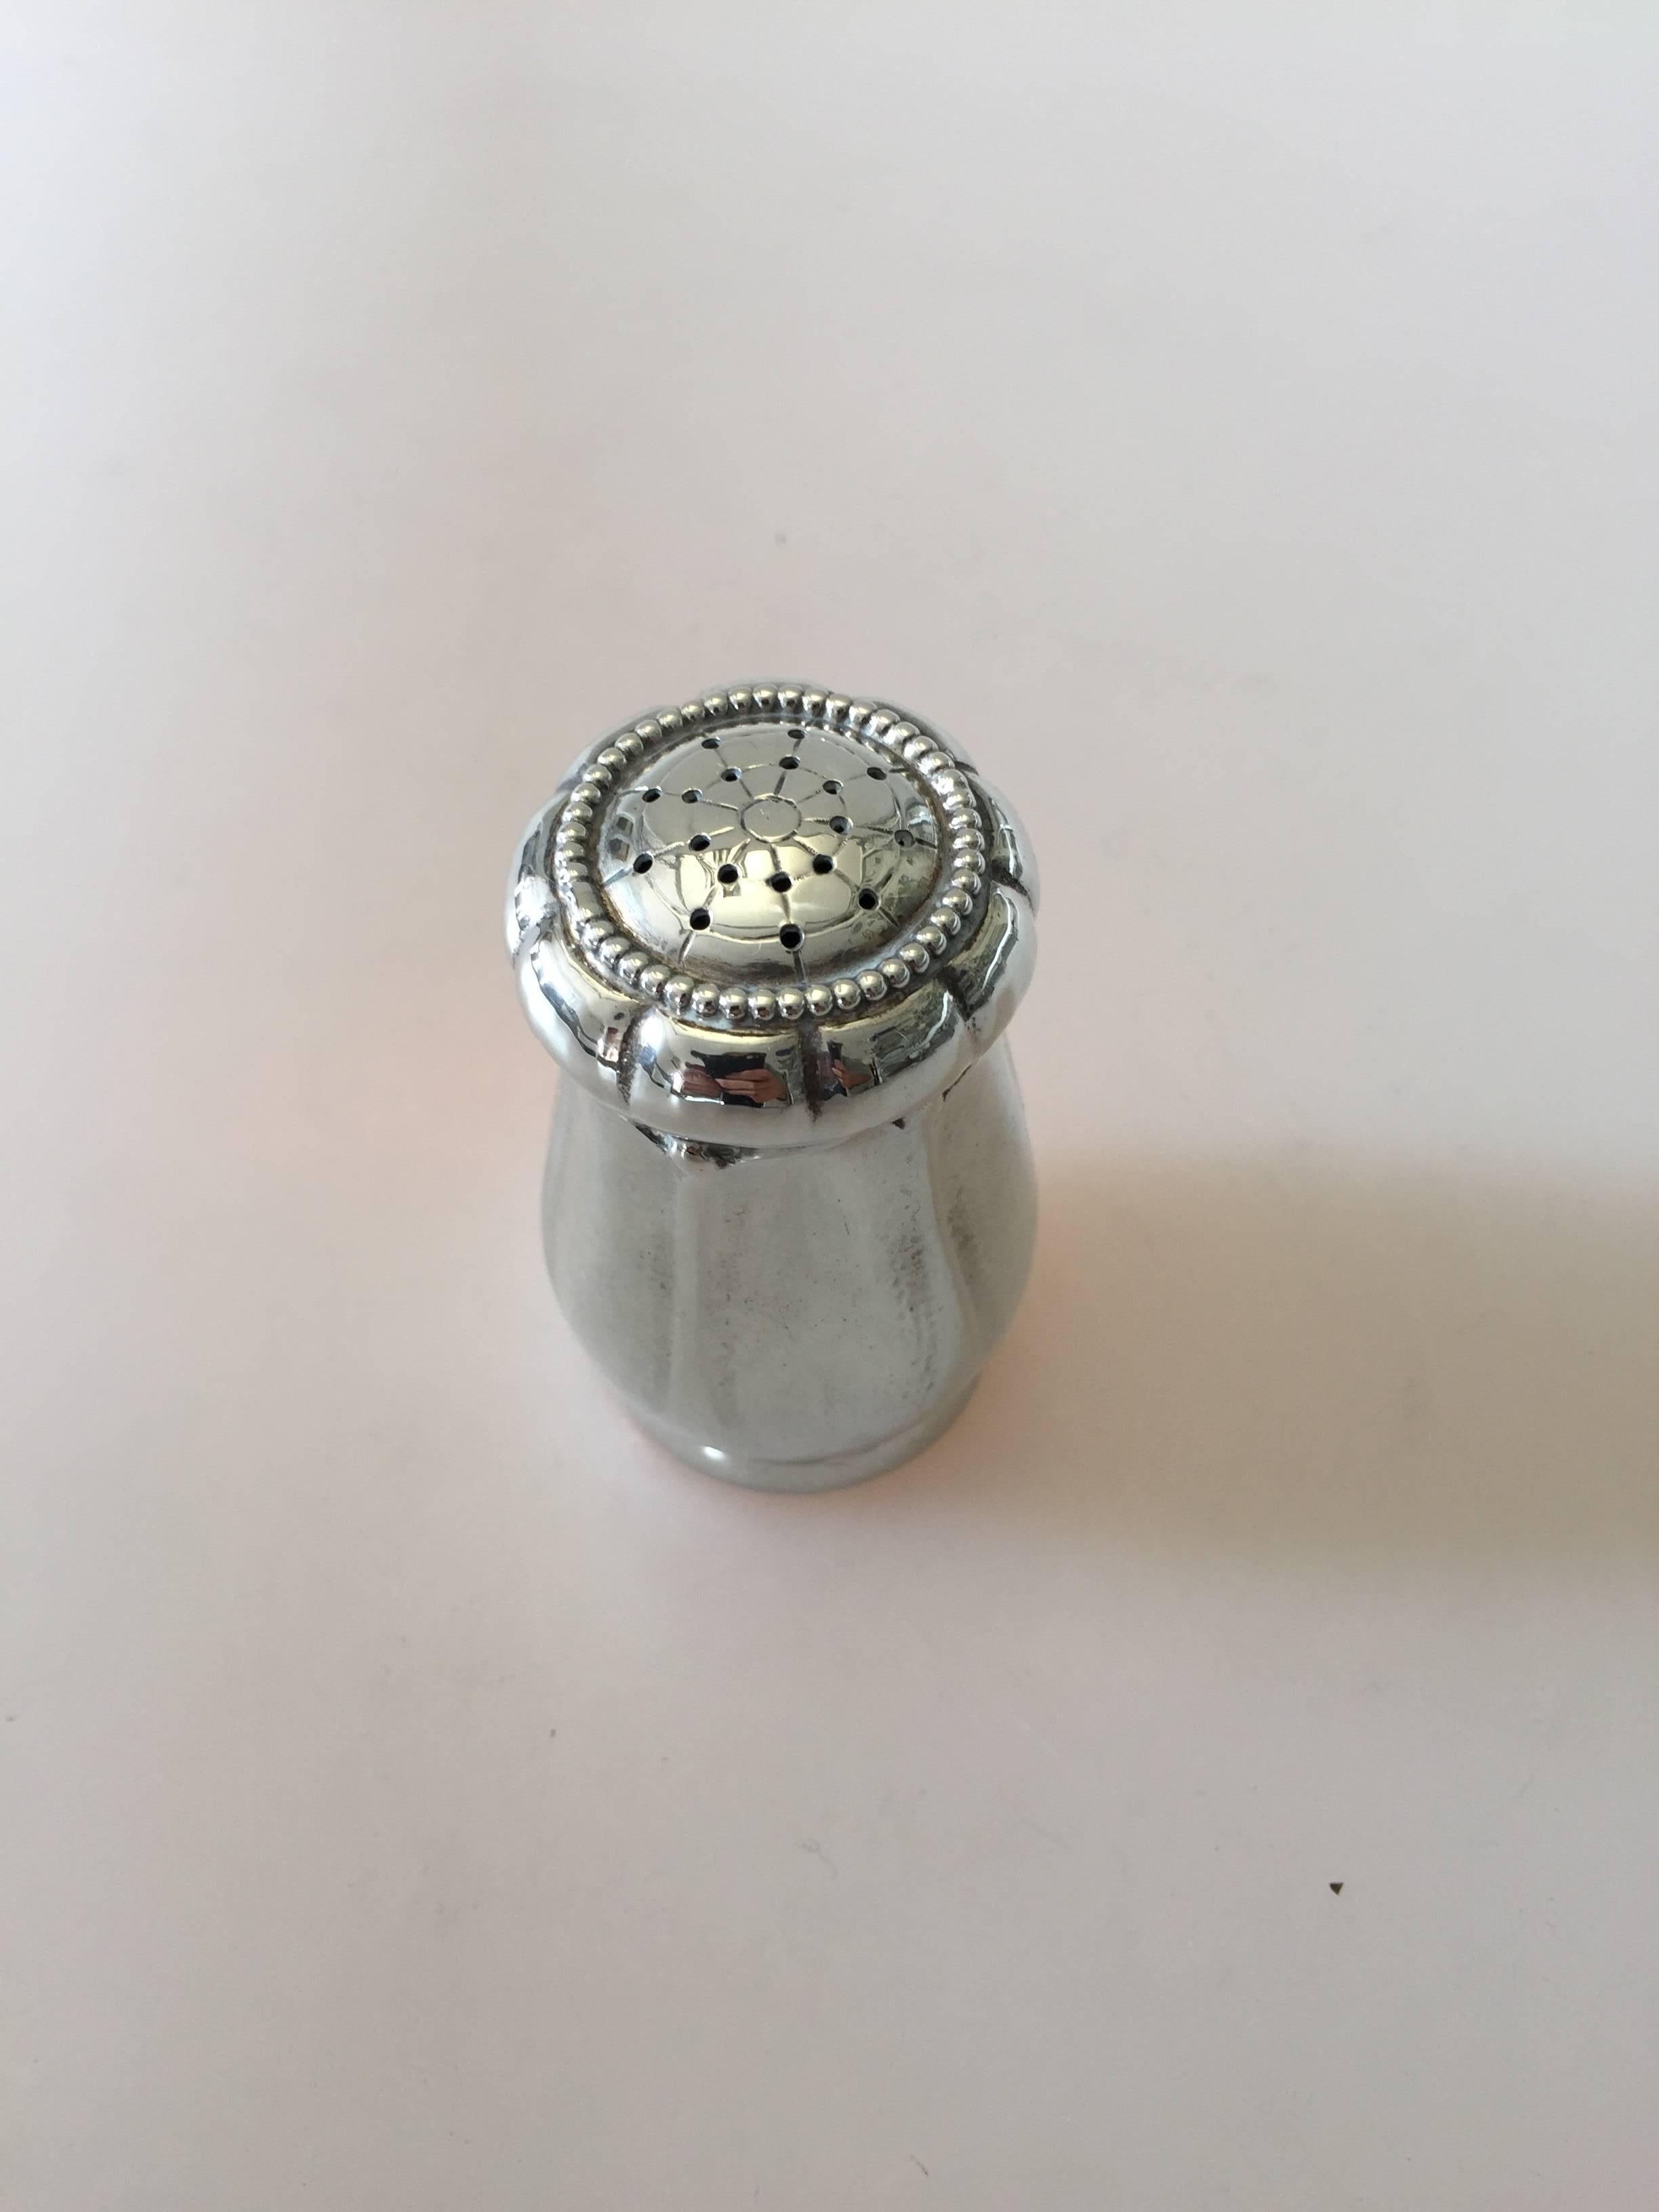 Georg Jensen sterling silver pepper shaker. 

Place of origin: Denmark, 1915-1920. 

Georg Jensen (1866-1935) opened his small silver atelier in Copenhagen, Denmark in 1904. By 1935 the year of his death, he had received world acclaim and was